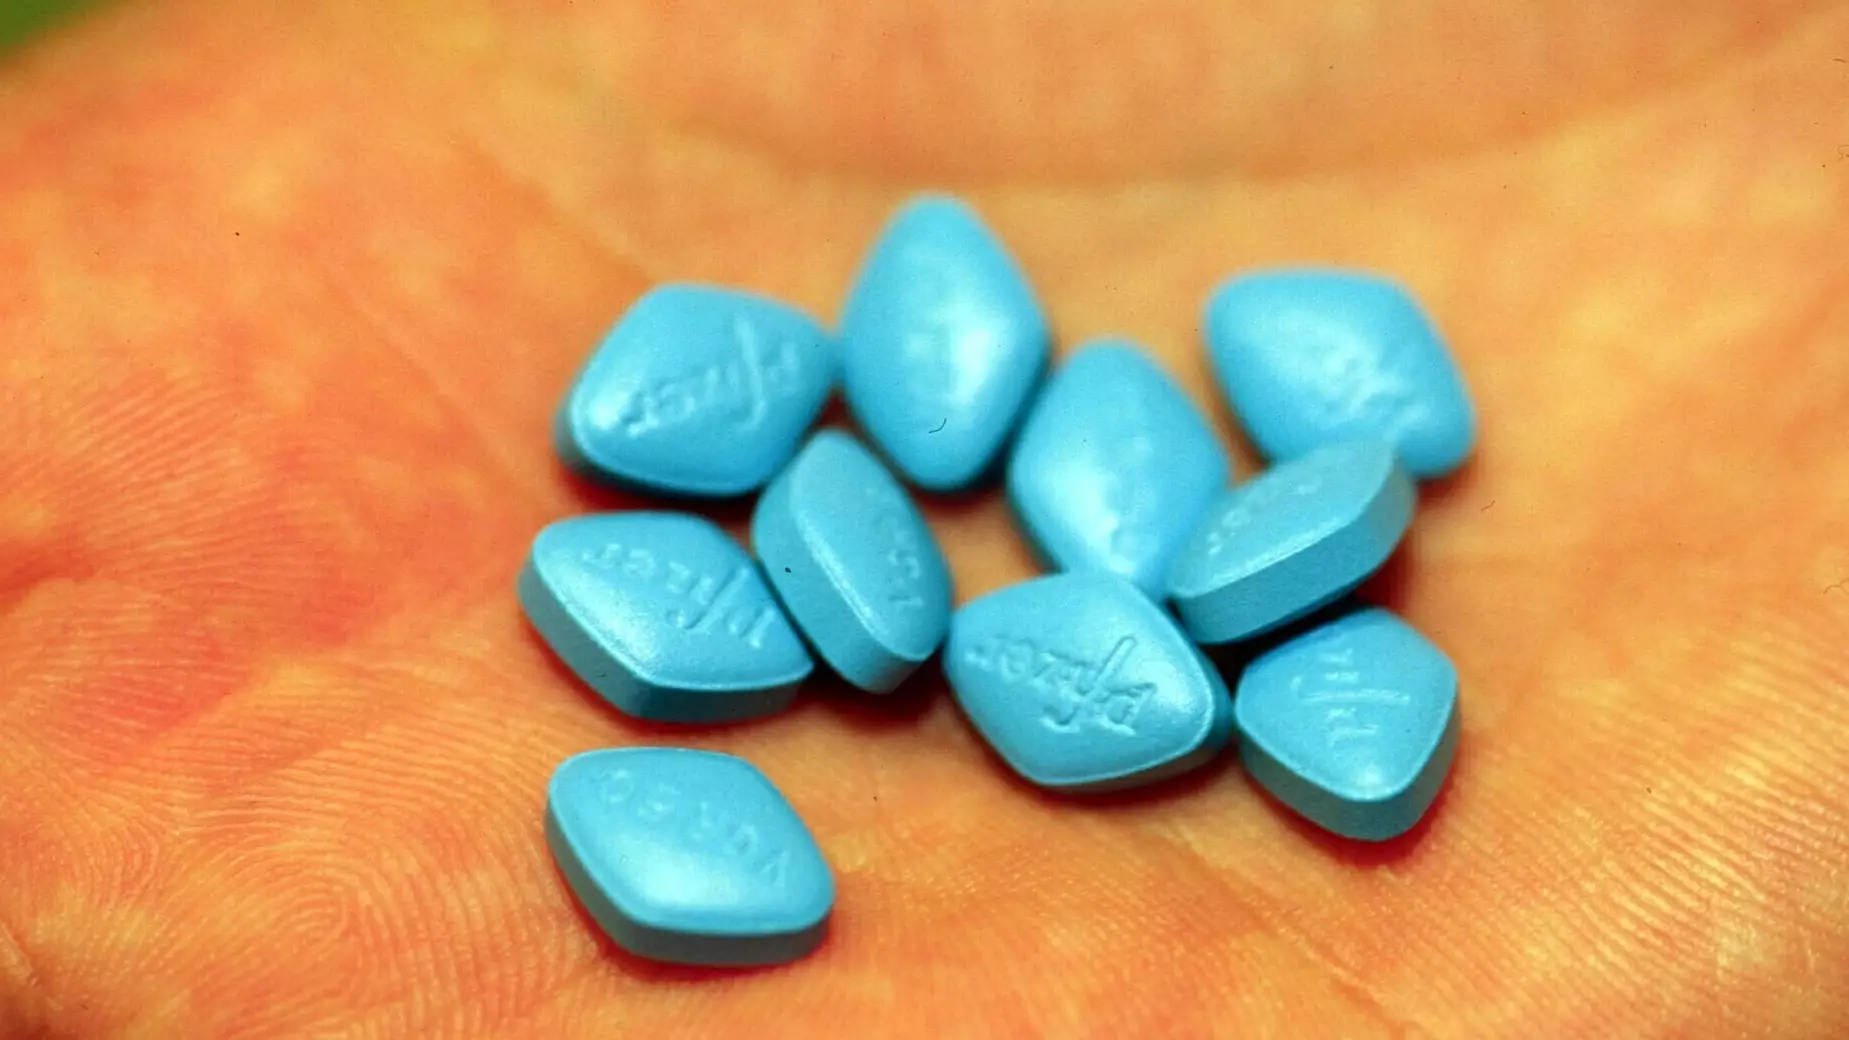 Lawyer Says Man Who Stole Viagra Is 'Not A Hardened Criminal' 